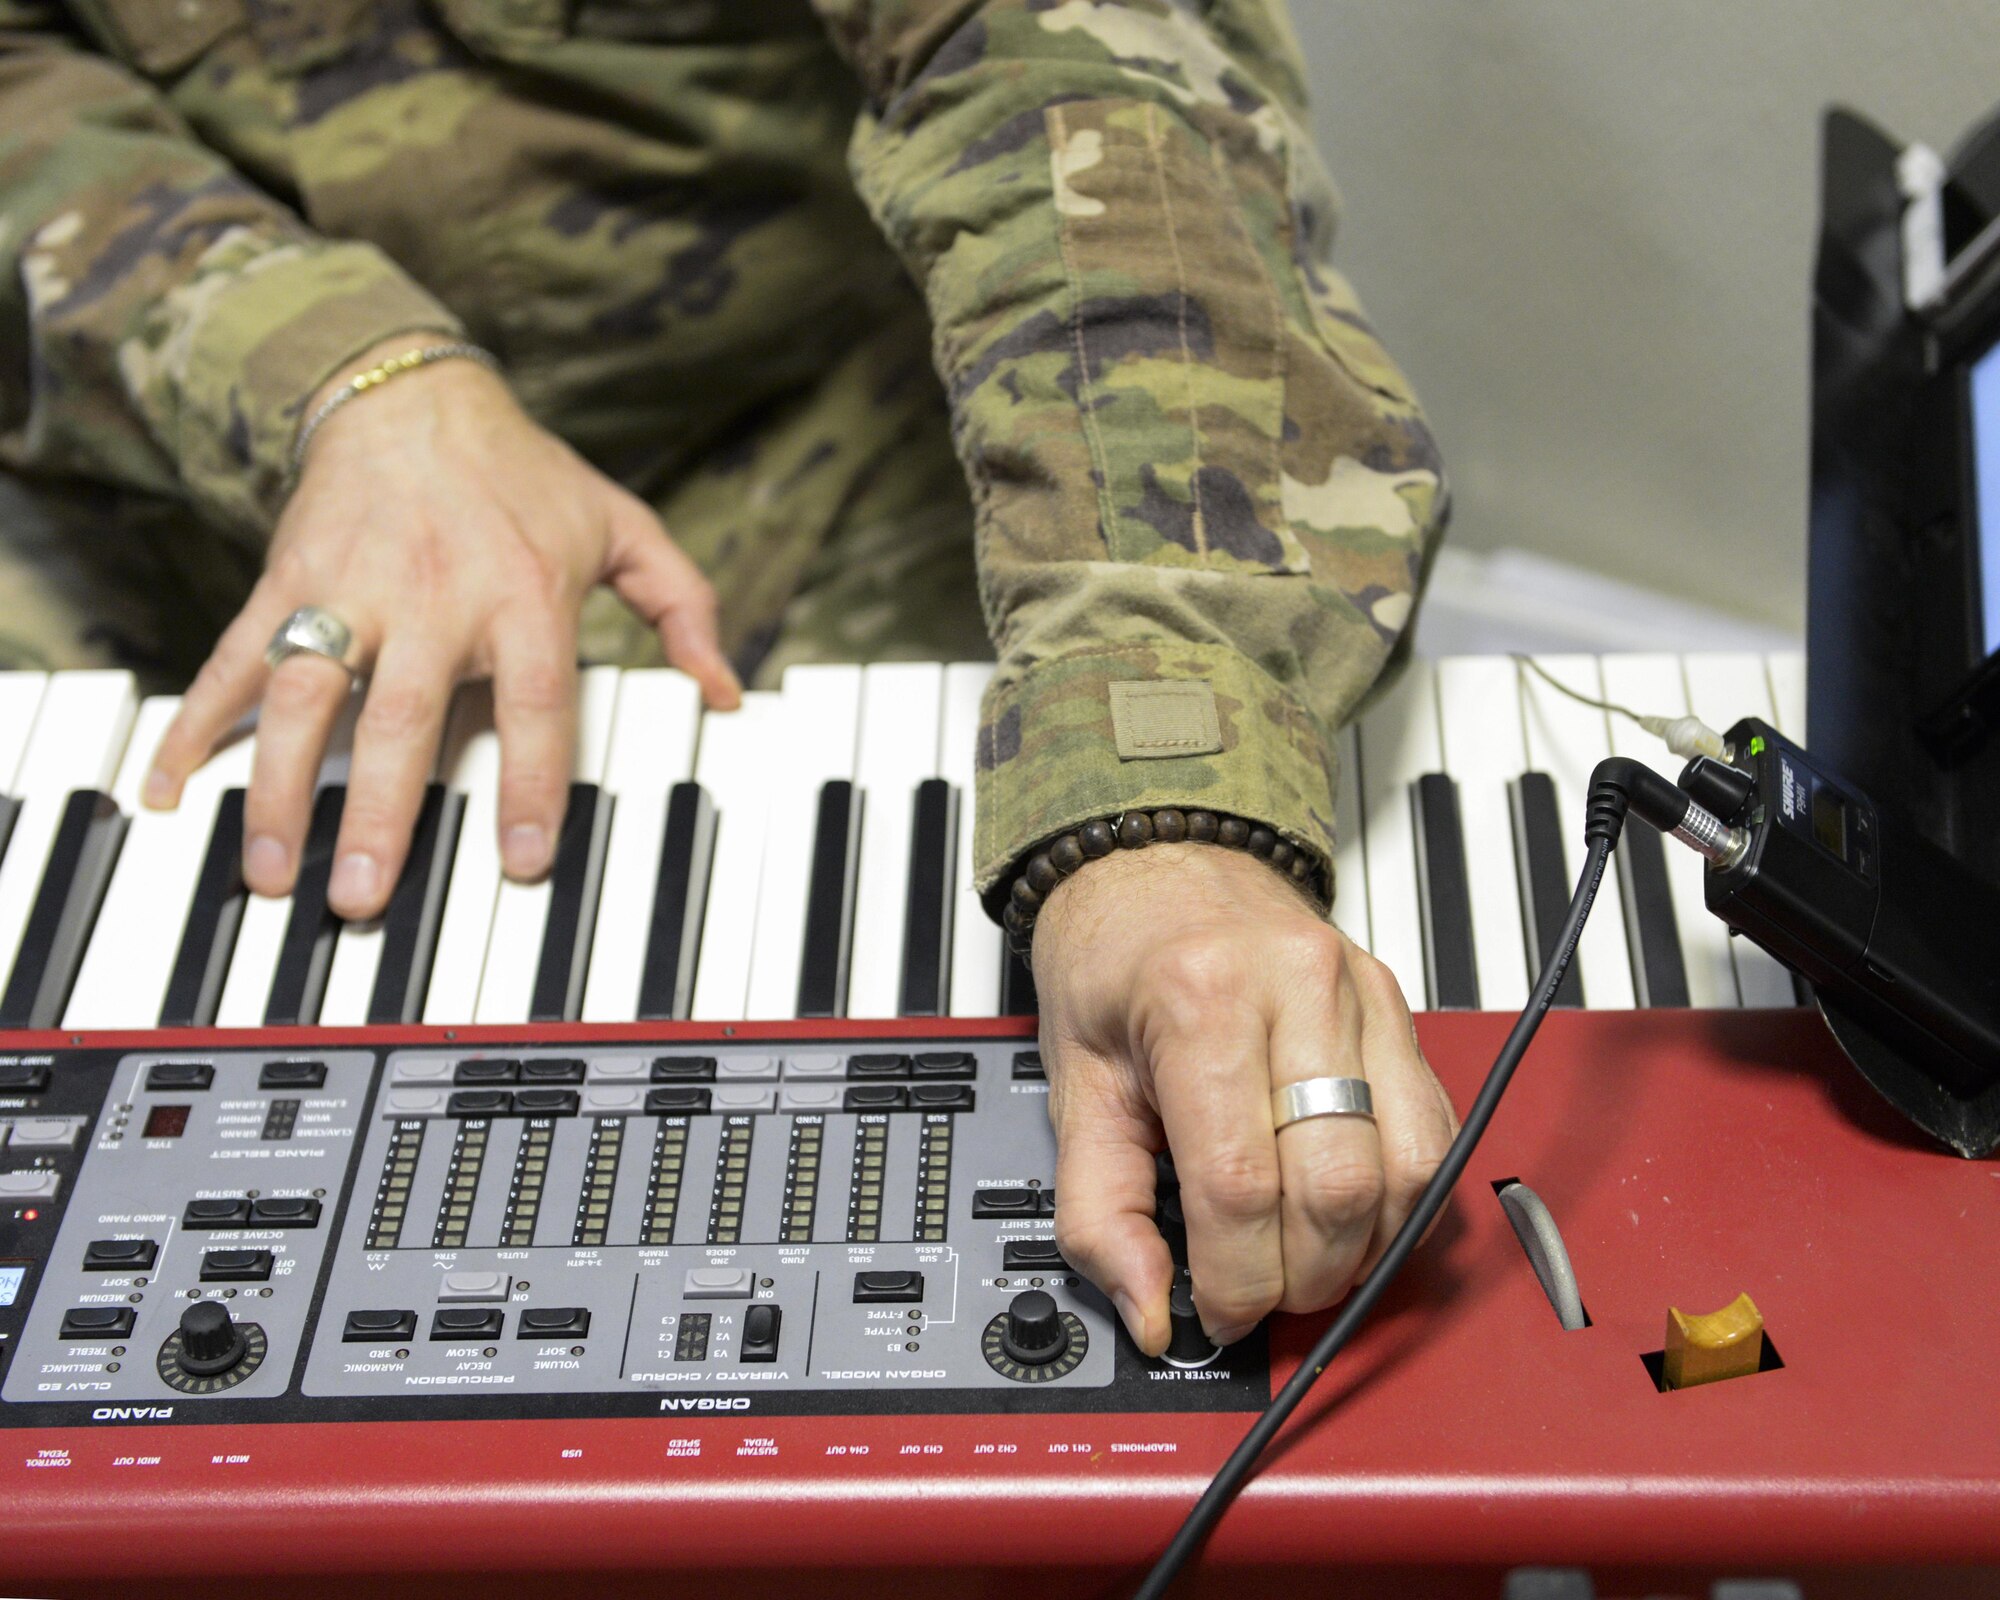 U.S. Air Force Staff Sgt. Robert Barnes, keyboardist assigned to the Air Force Central Command Band, Touch-n-Go, plays keyboard during a recording session as the band recorded their punk rock rendition of the Air Force Song at Al Udeid, Air Force Base, Qatar, Sept. 21, 2017.